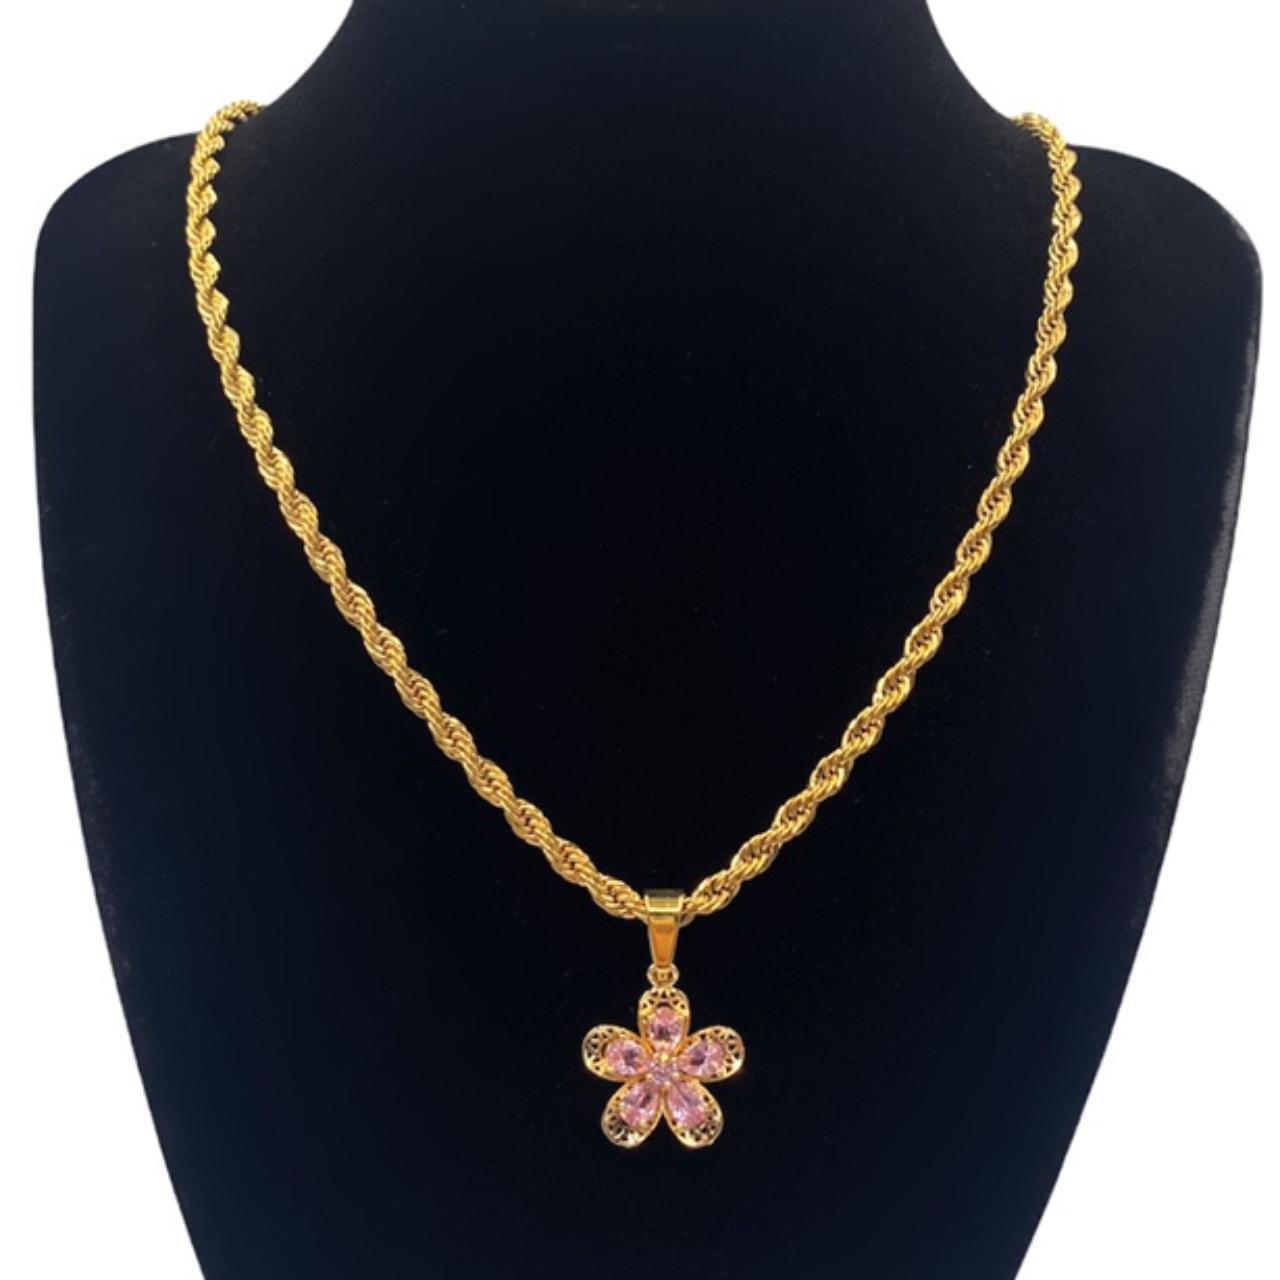 Gold Chain Necklace w/ Pink Flower Pendant • Layered... - Depop